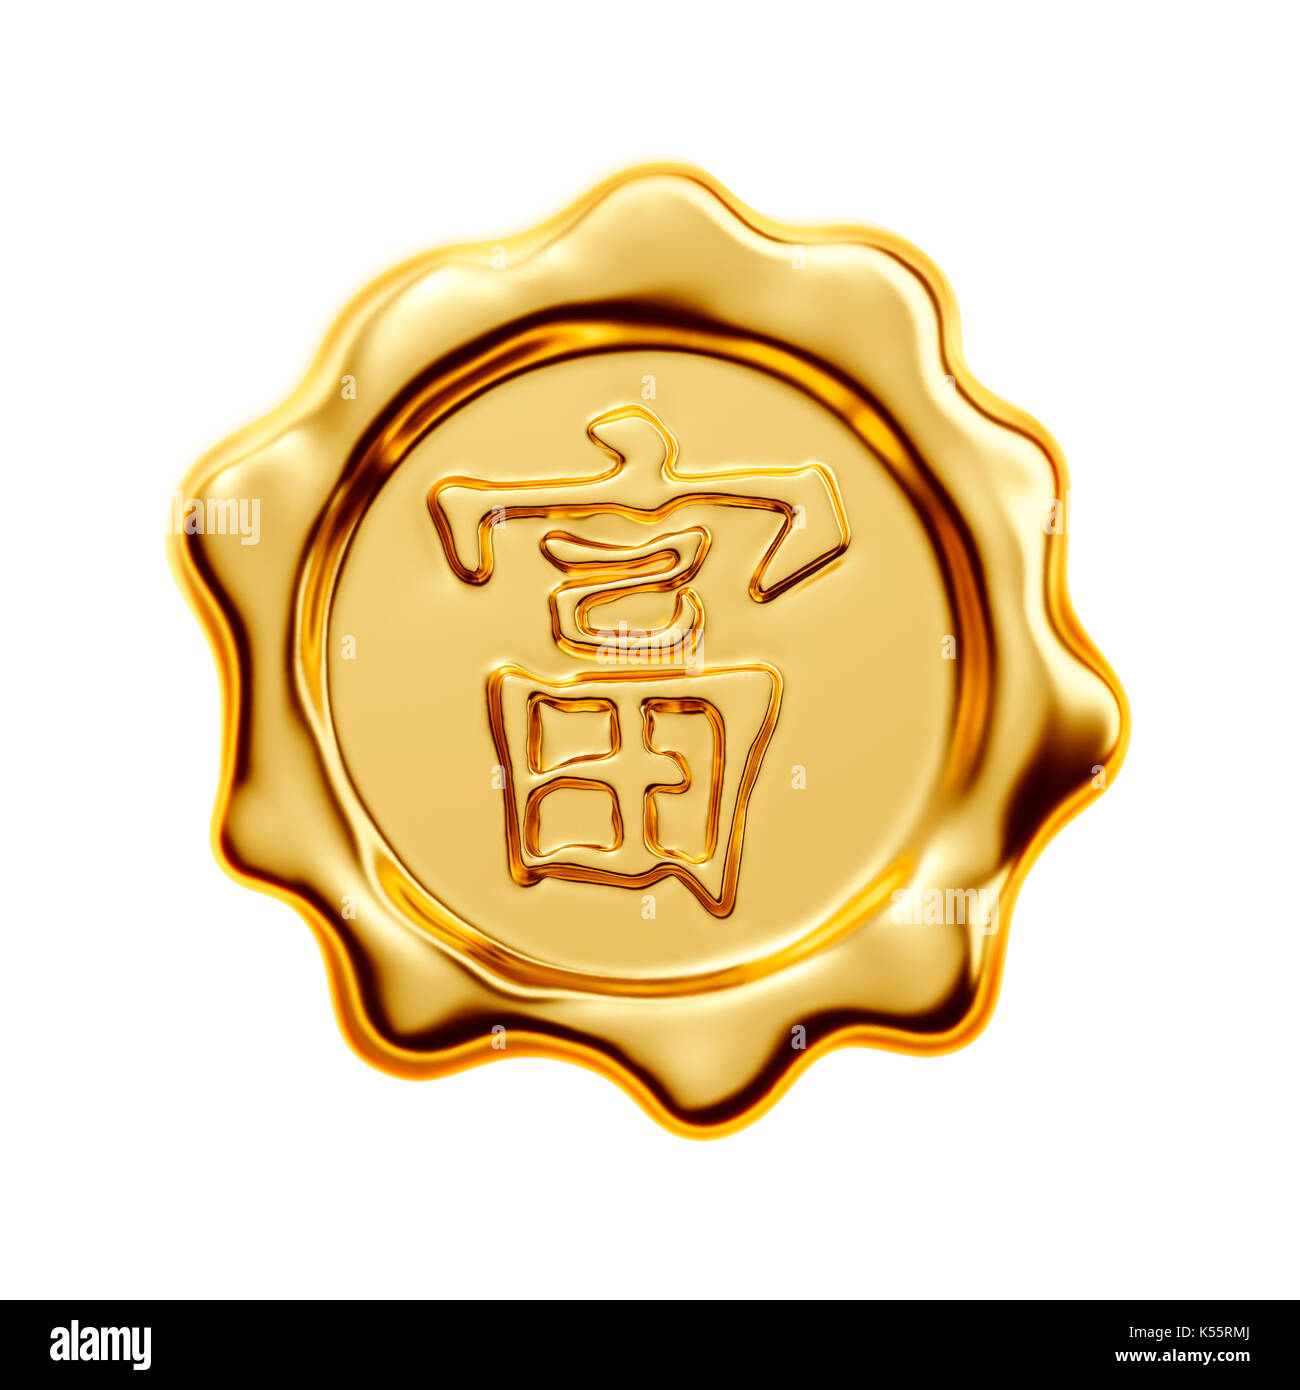 Gold seal isolated on white background, Chinese calligraphy 'FU' (Foreign text means Wealth) Stock Photo